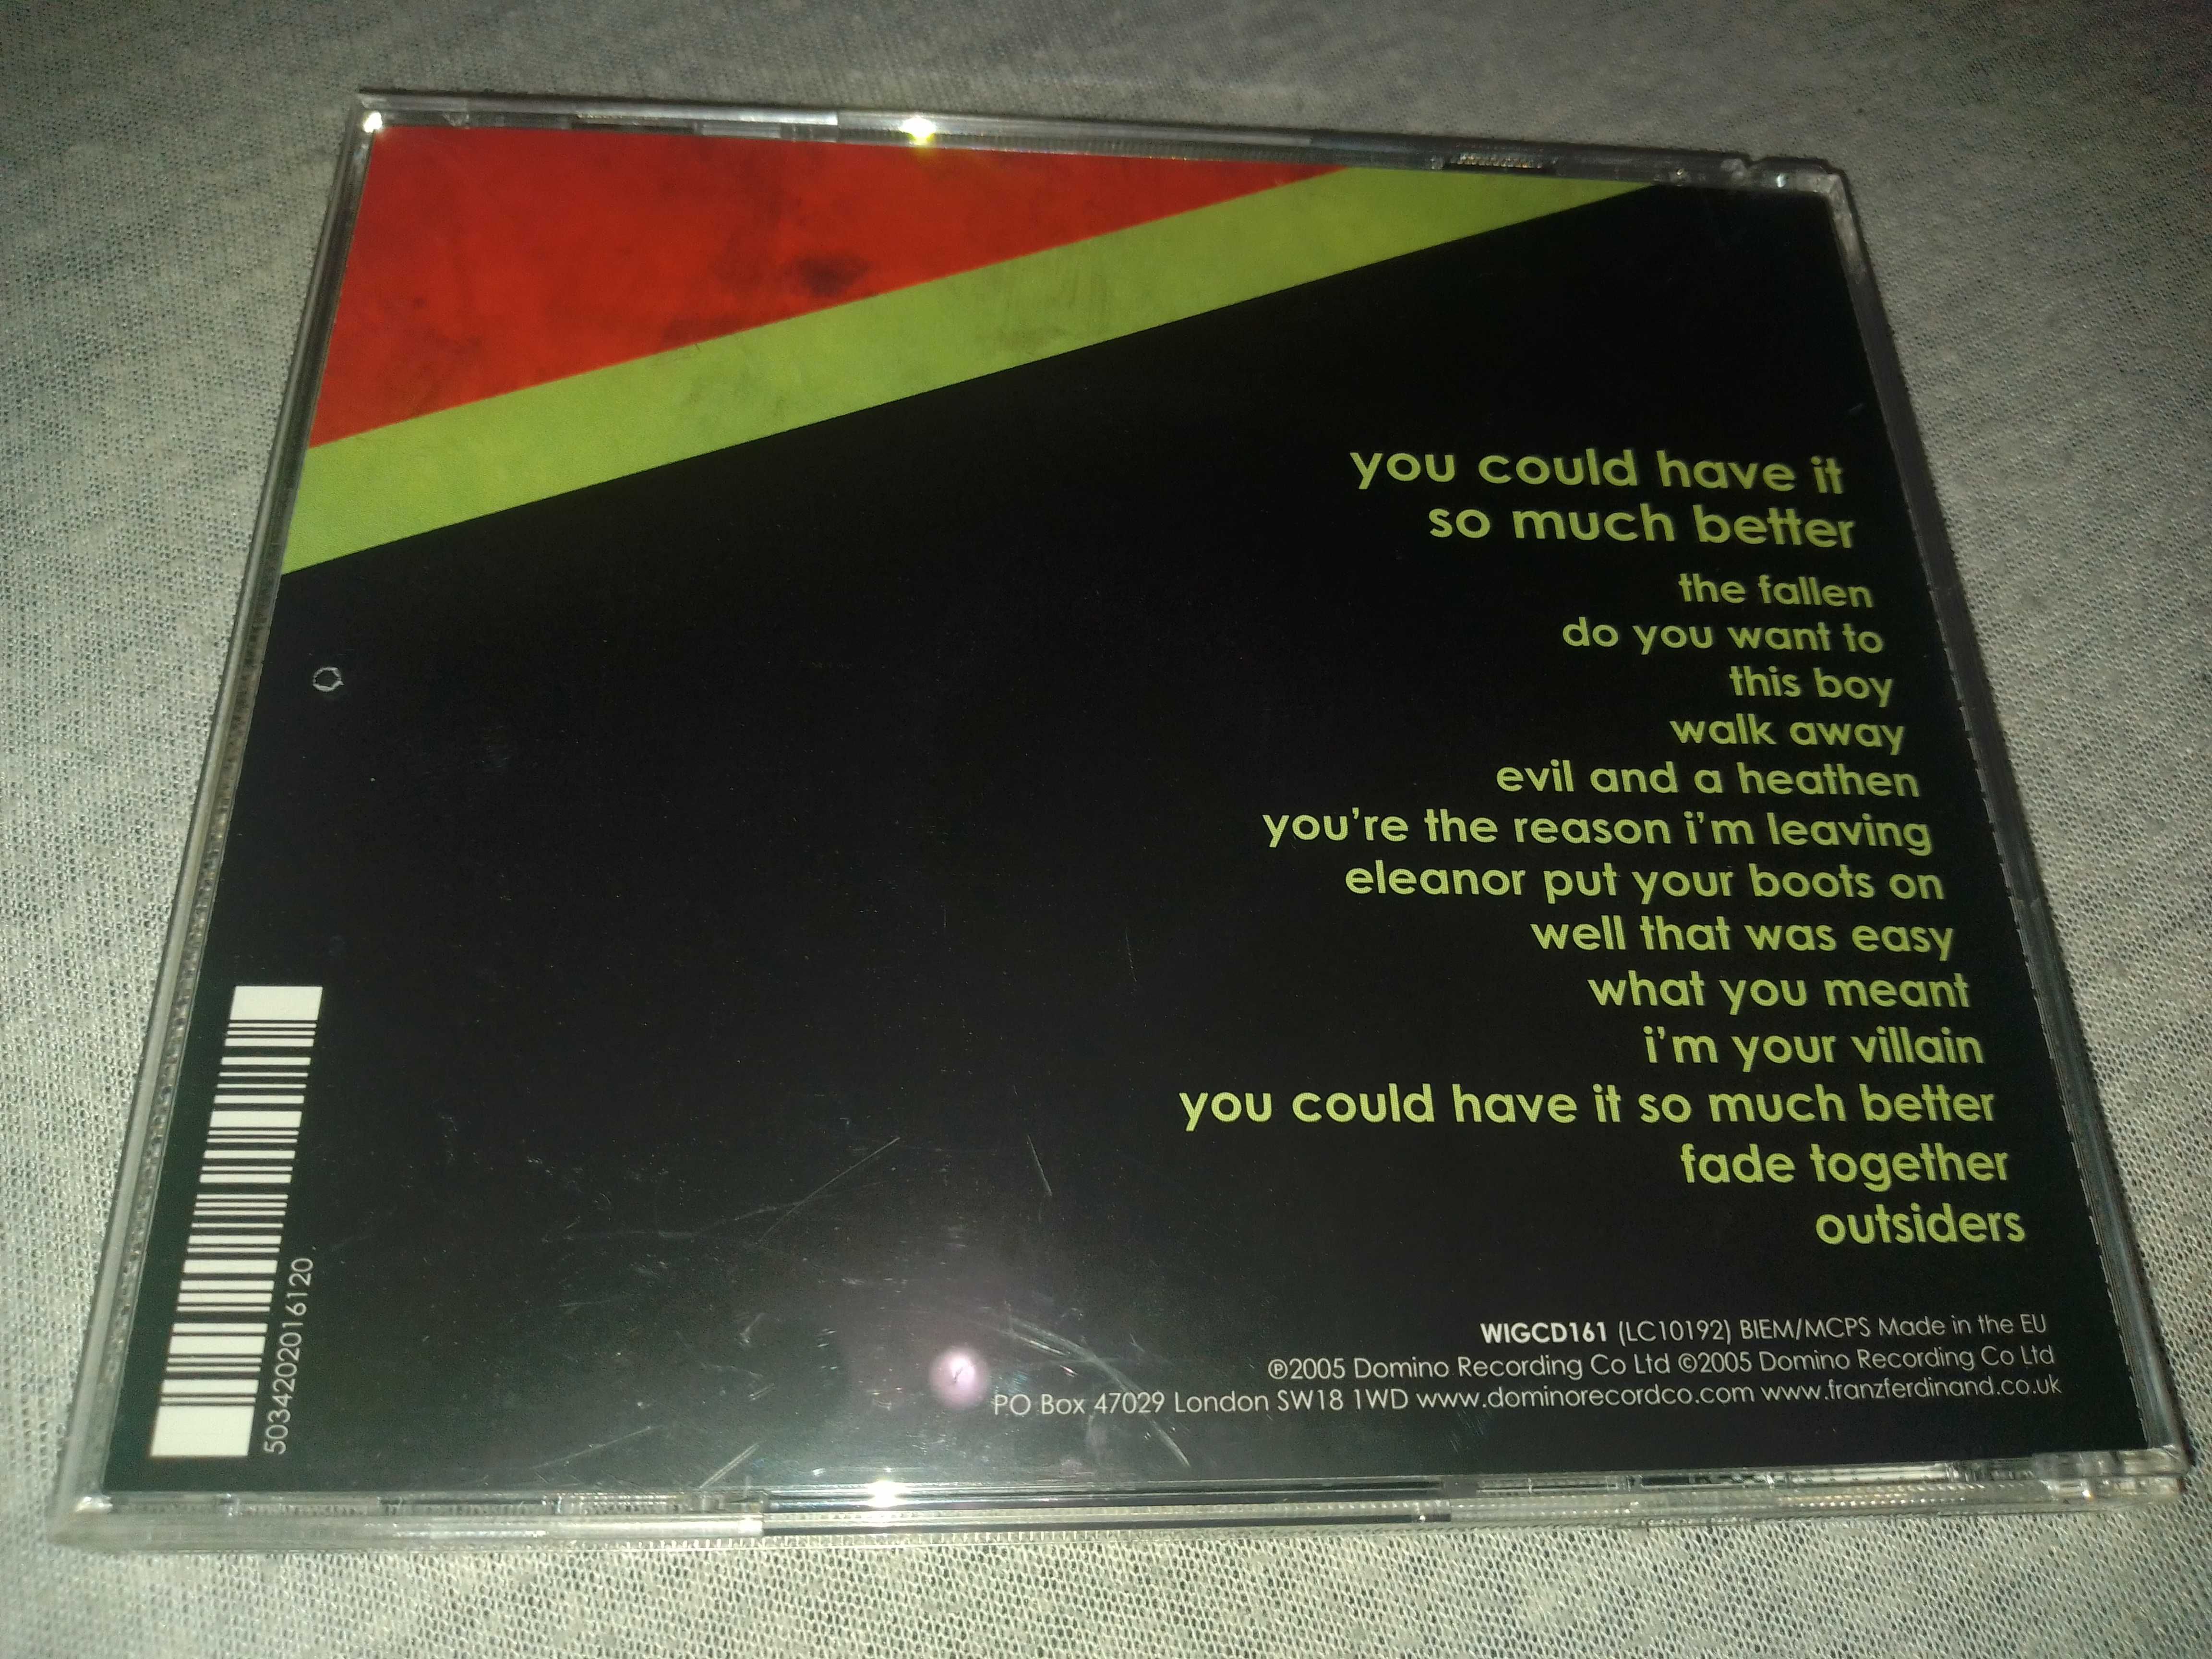 Franz Ferdinand "You Could Have It So Much Better" CD Made In The EU.